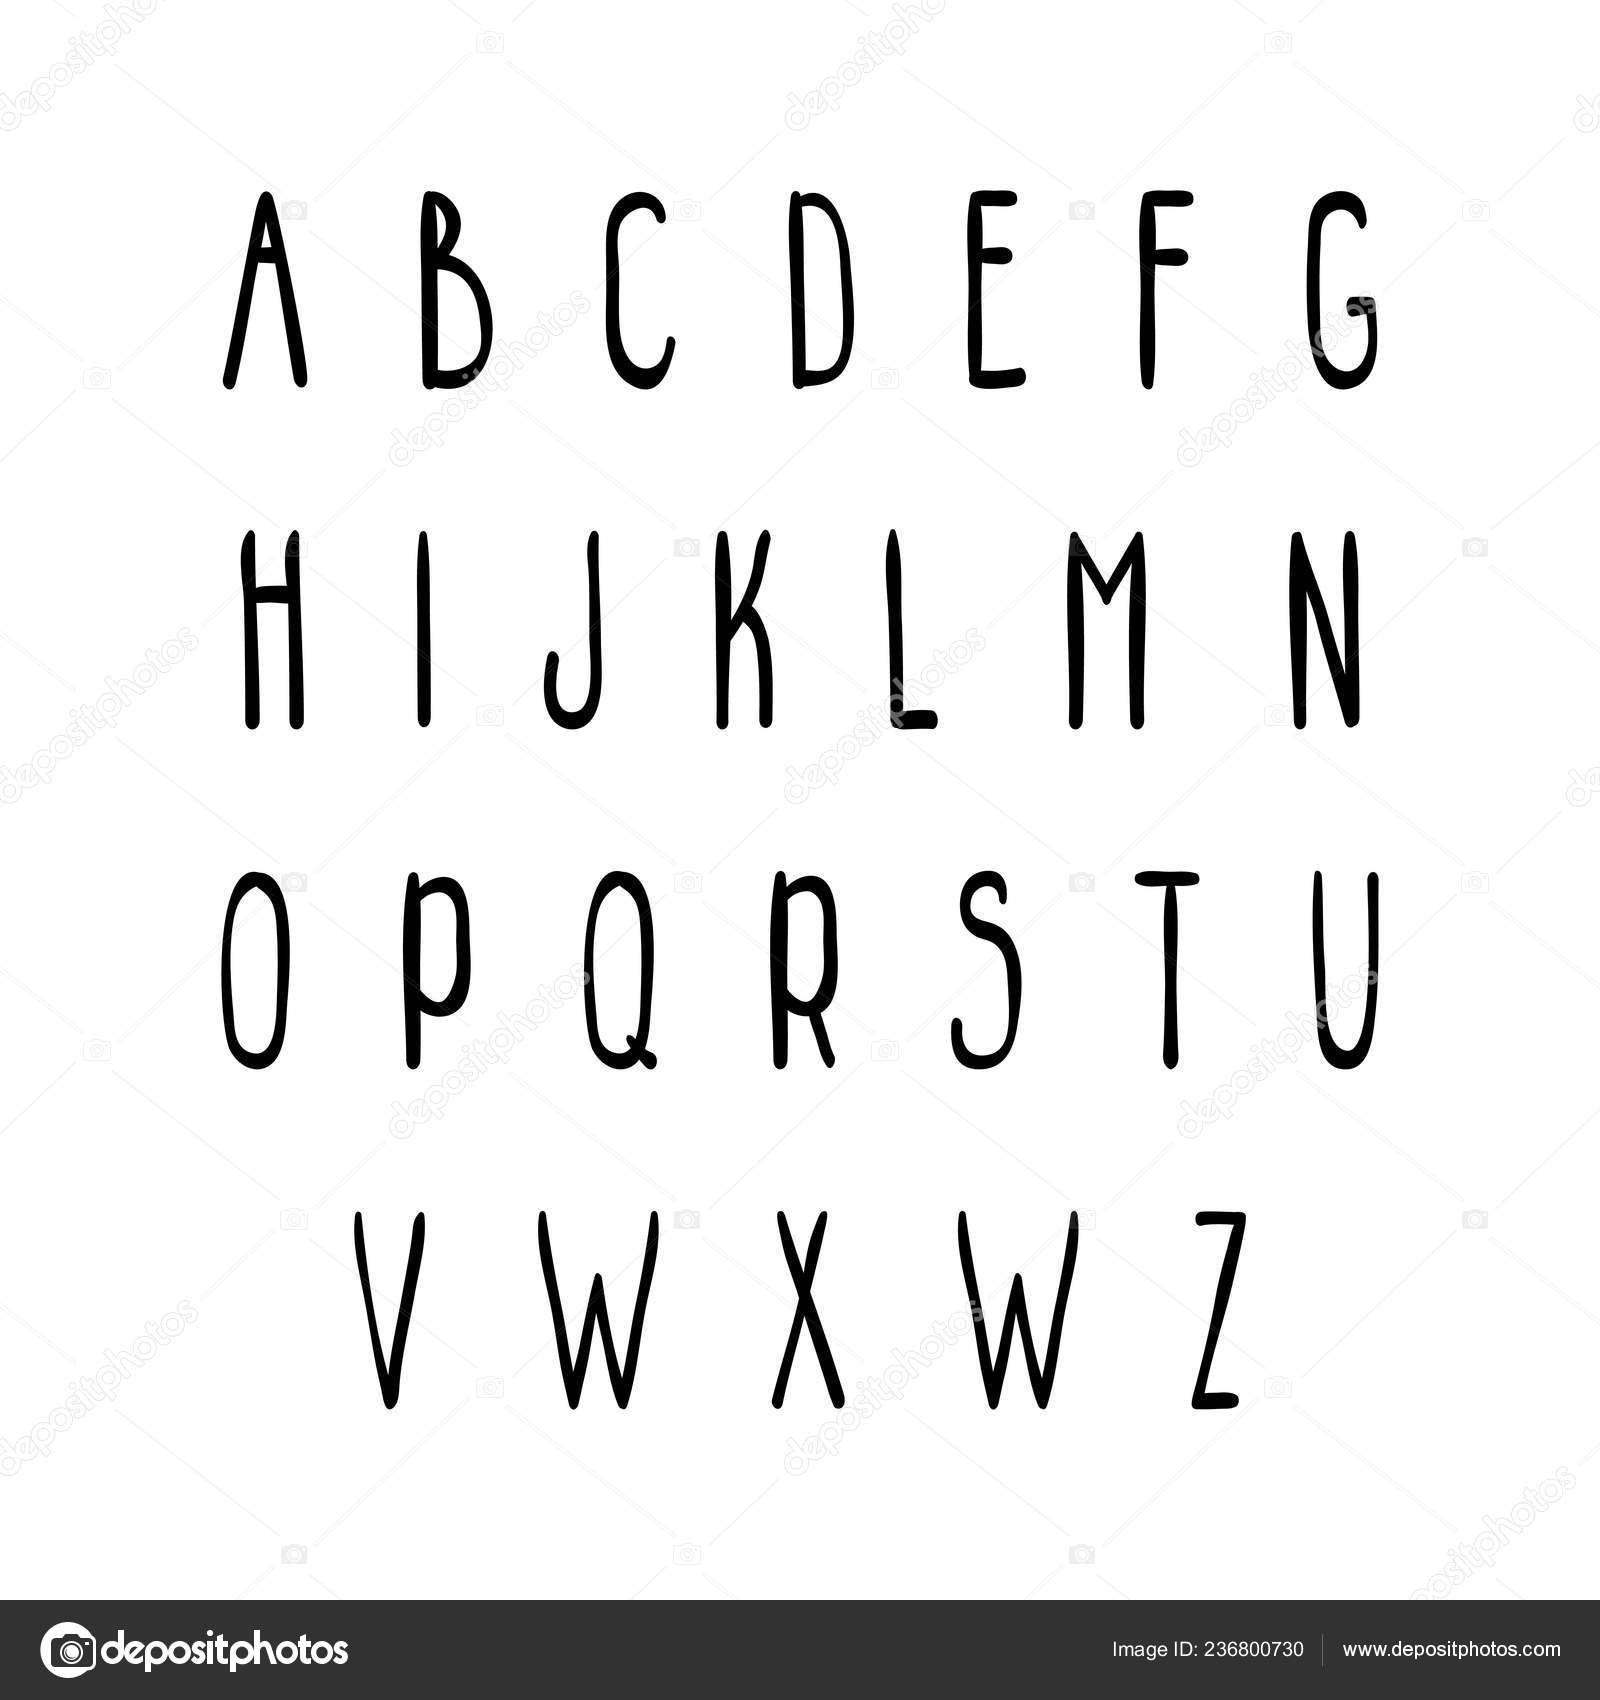 Hand-drawn simple fun lettering alphabet Vector Image